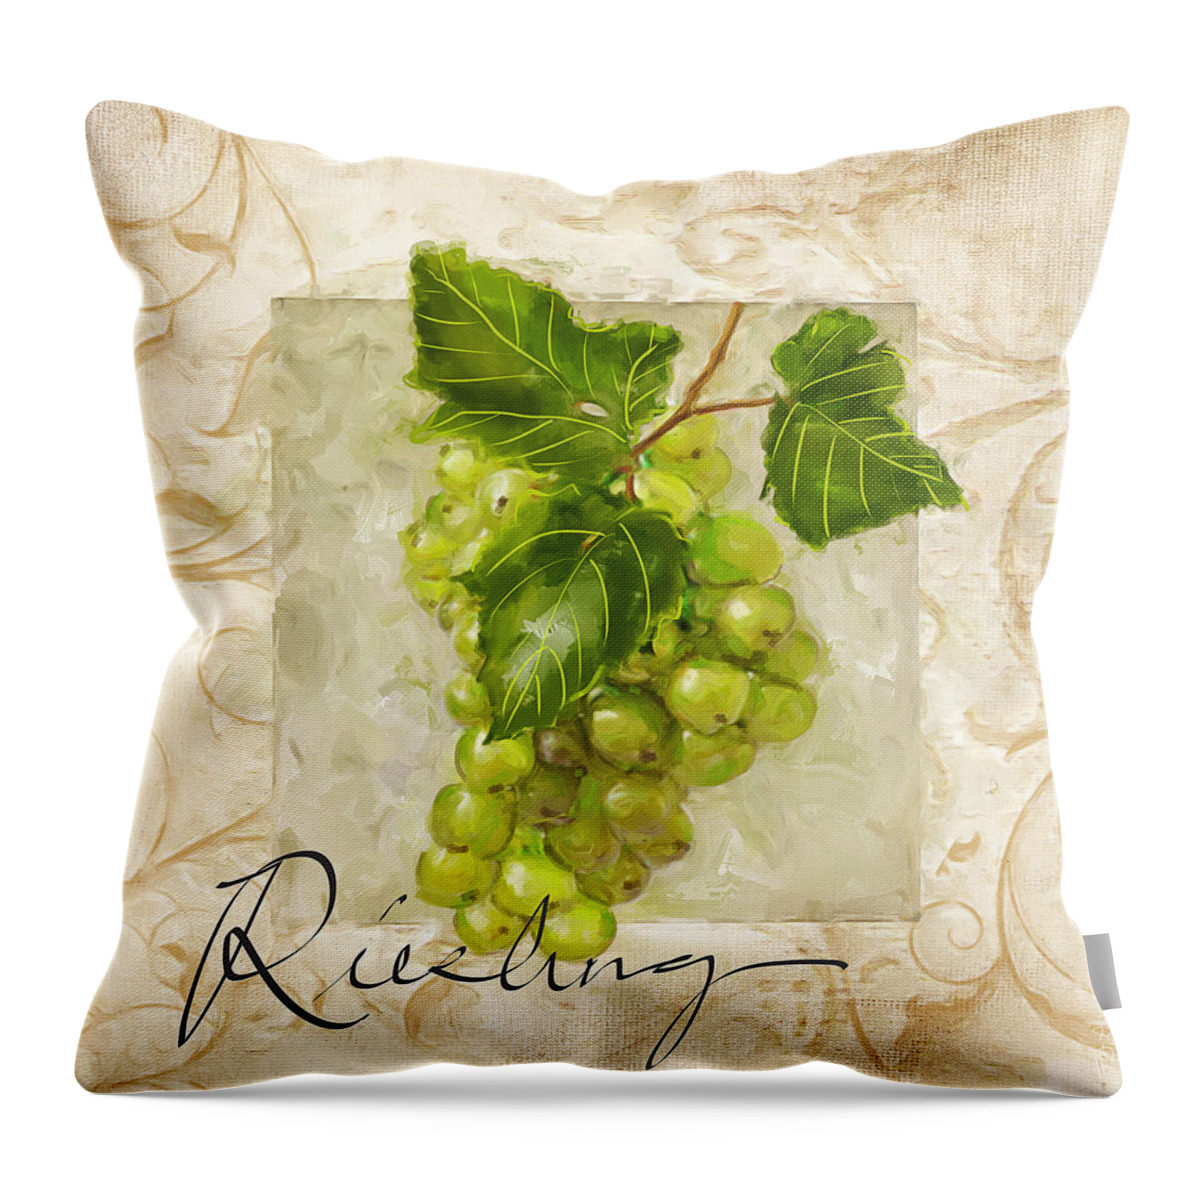 Wine Throw Pillow featuring the painting Riesling by Lourry Legarde